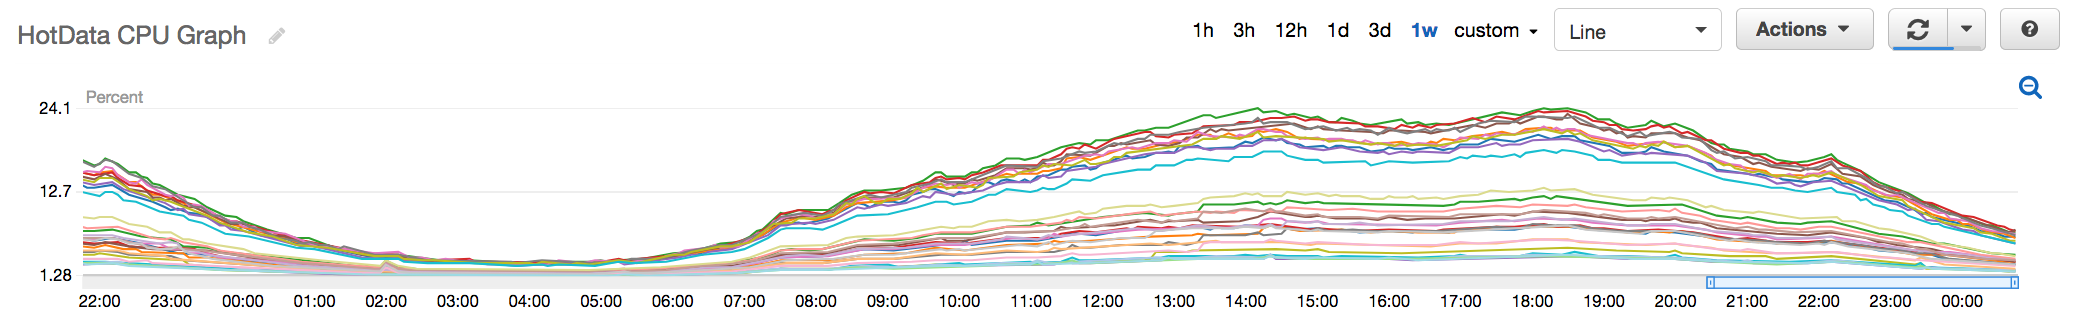 Fig 6. New Hot Data Redis Cluster with CPU peaking at around 24%